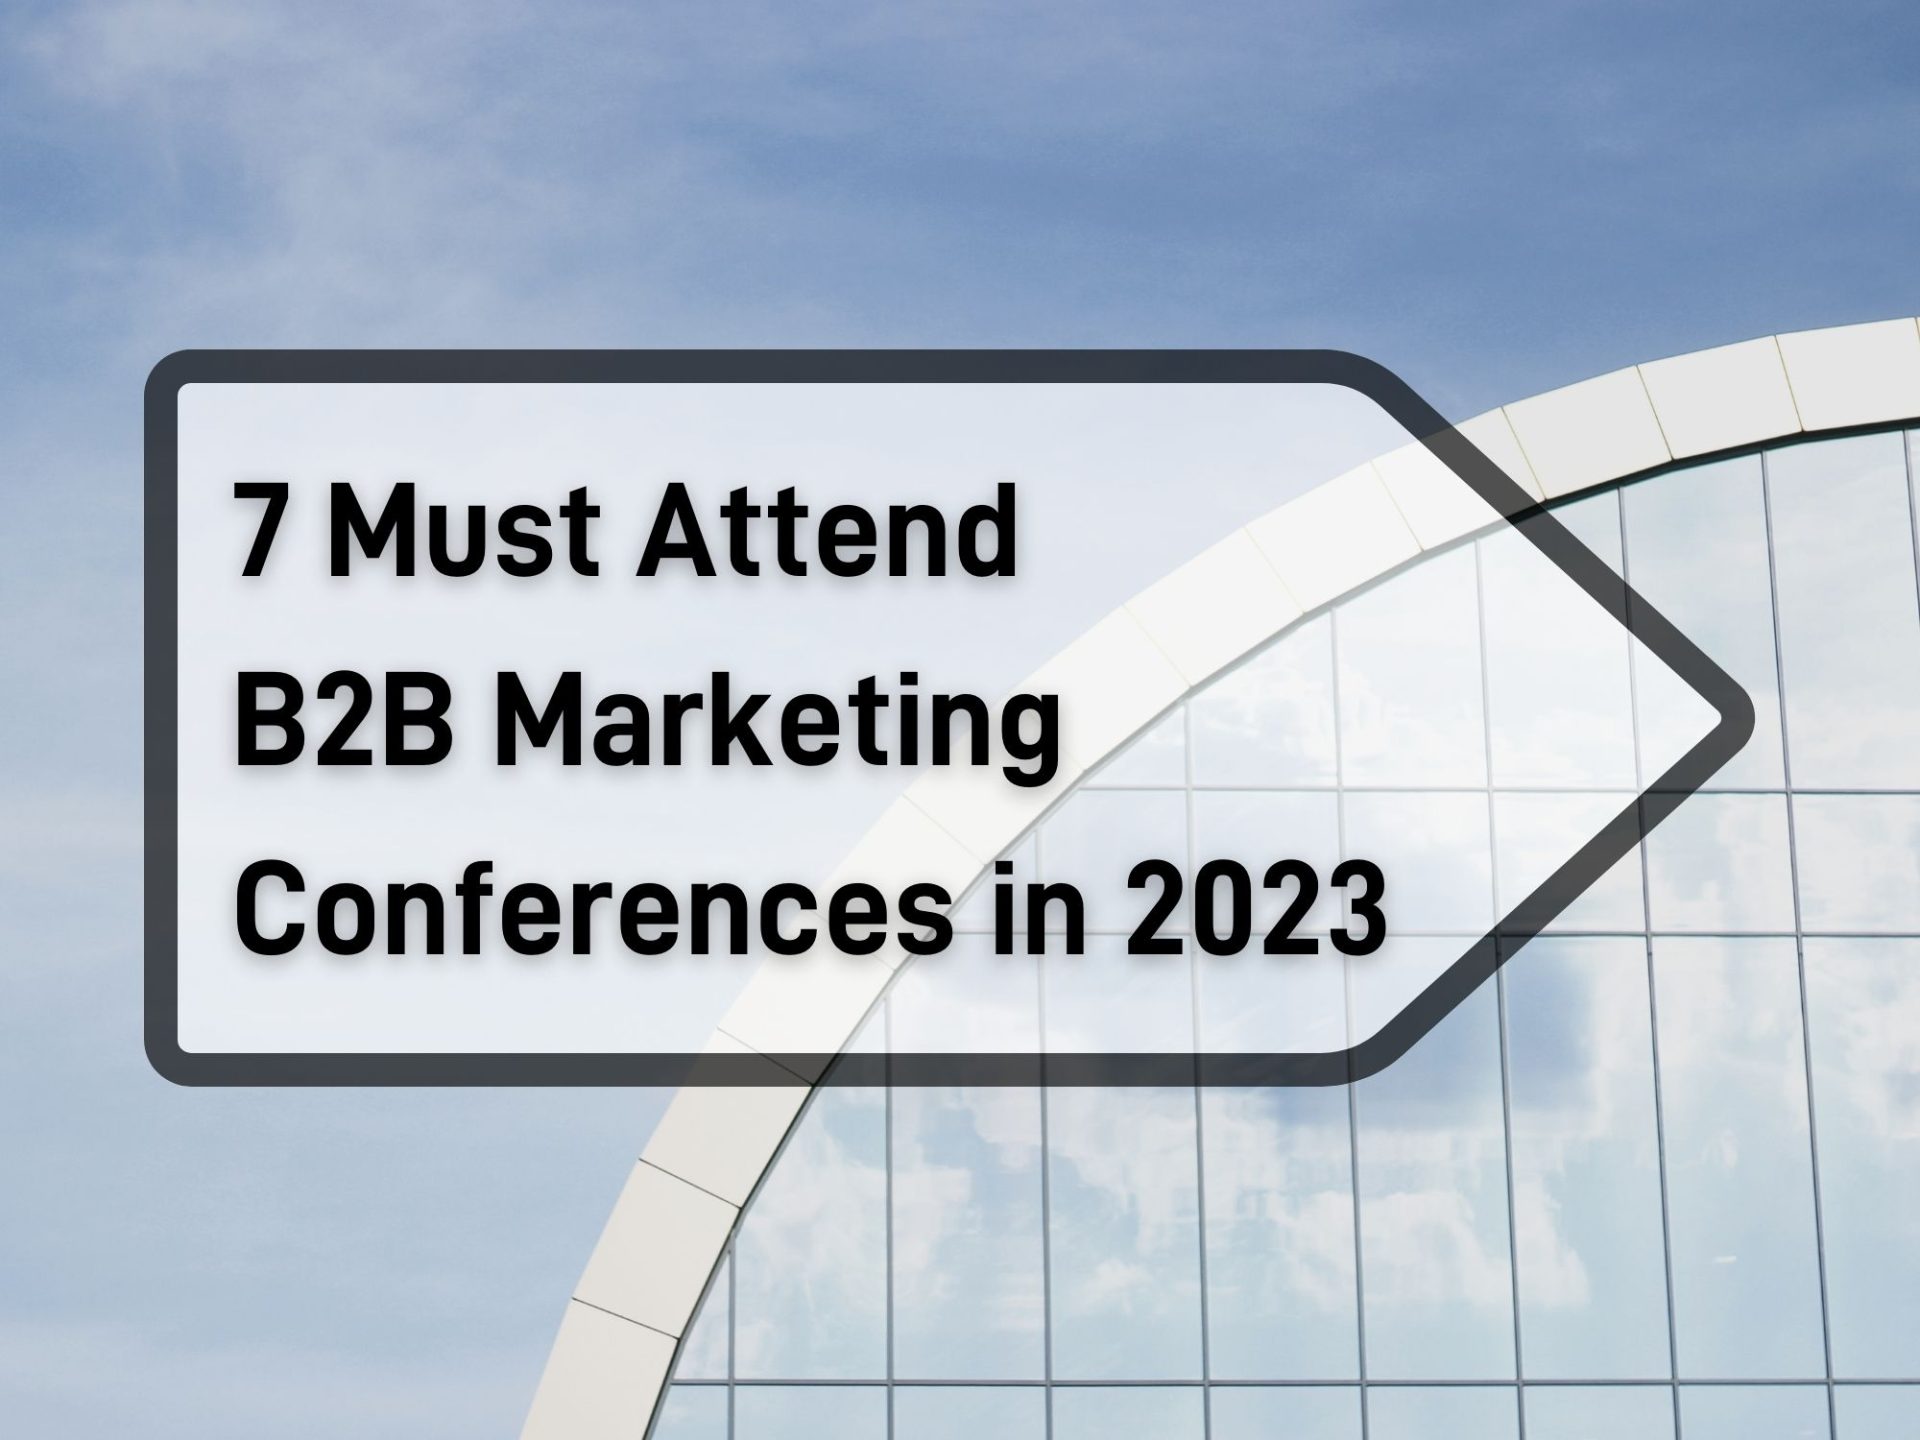 Must Attend B2B Marketing Conferences in 2023